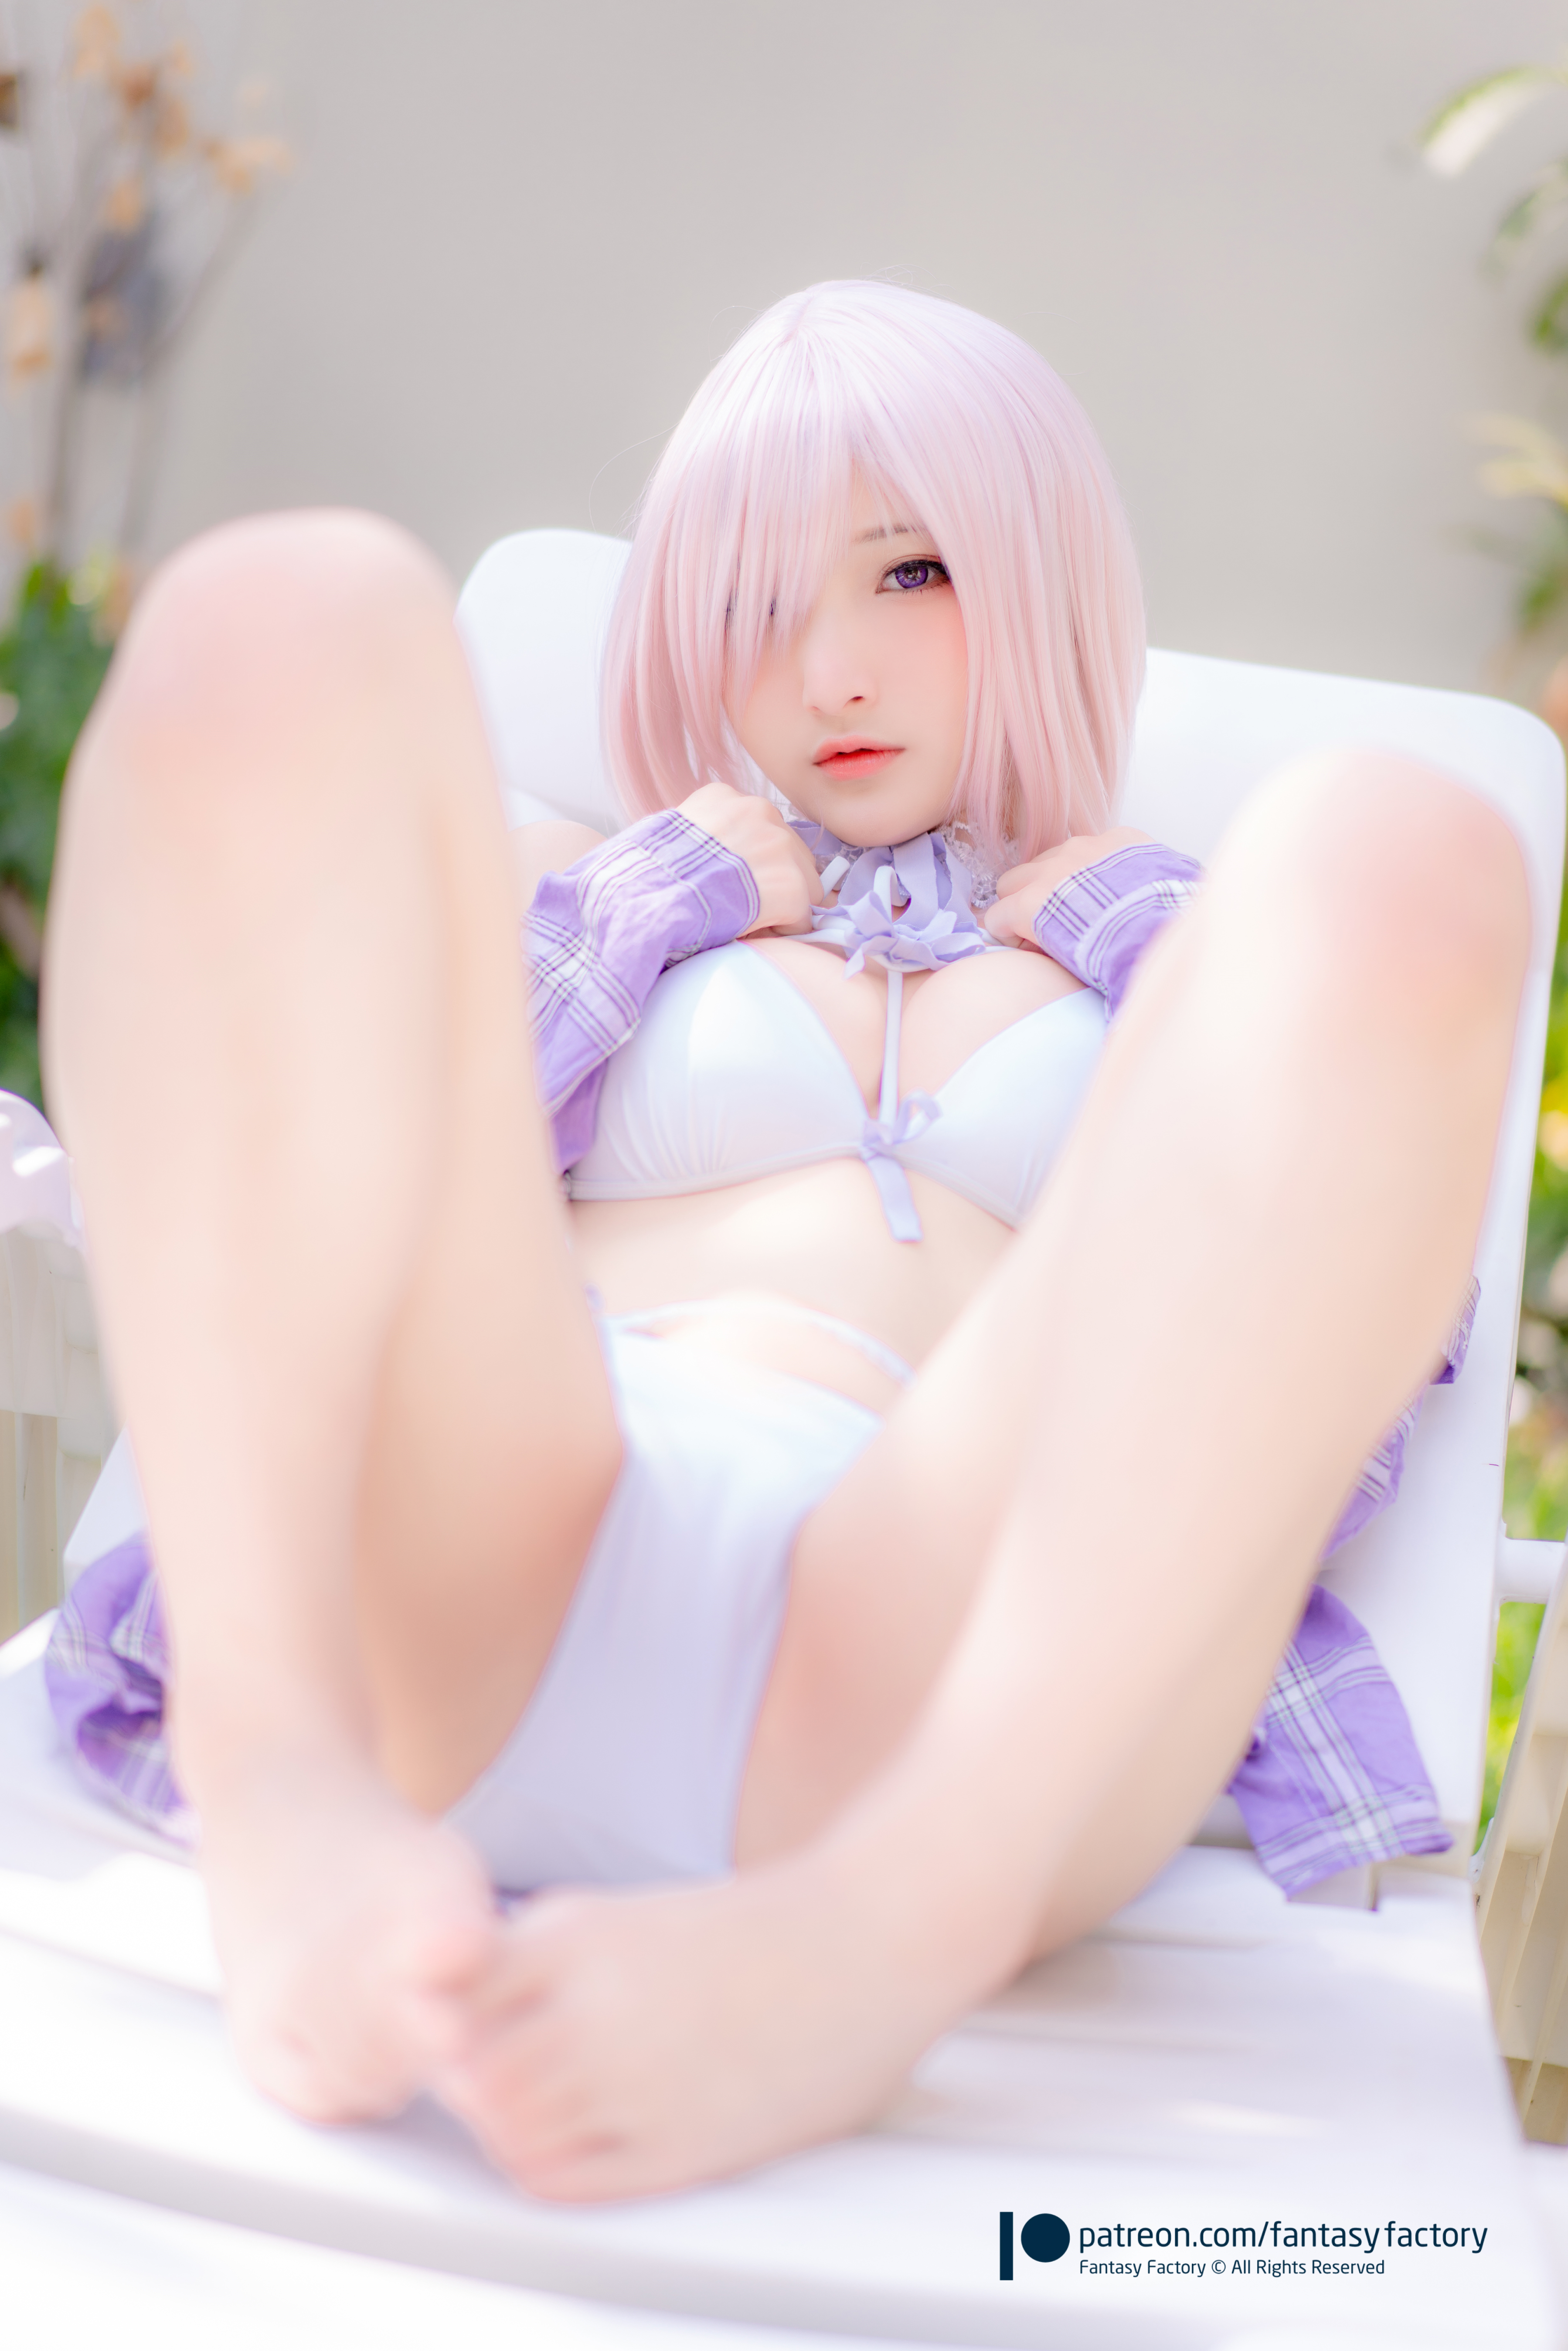 People 3597x5393 Fantasy Factory women model Asian cosplay Mash Kyrielight Fate/Grand Order Fate series shirt underwear bra panties barefoot bokeh looking at viewer outdoors women outdoors pool chair pointed toes